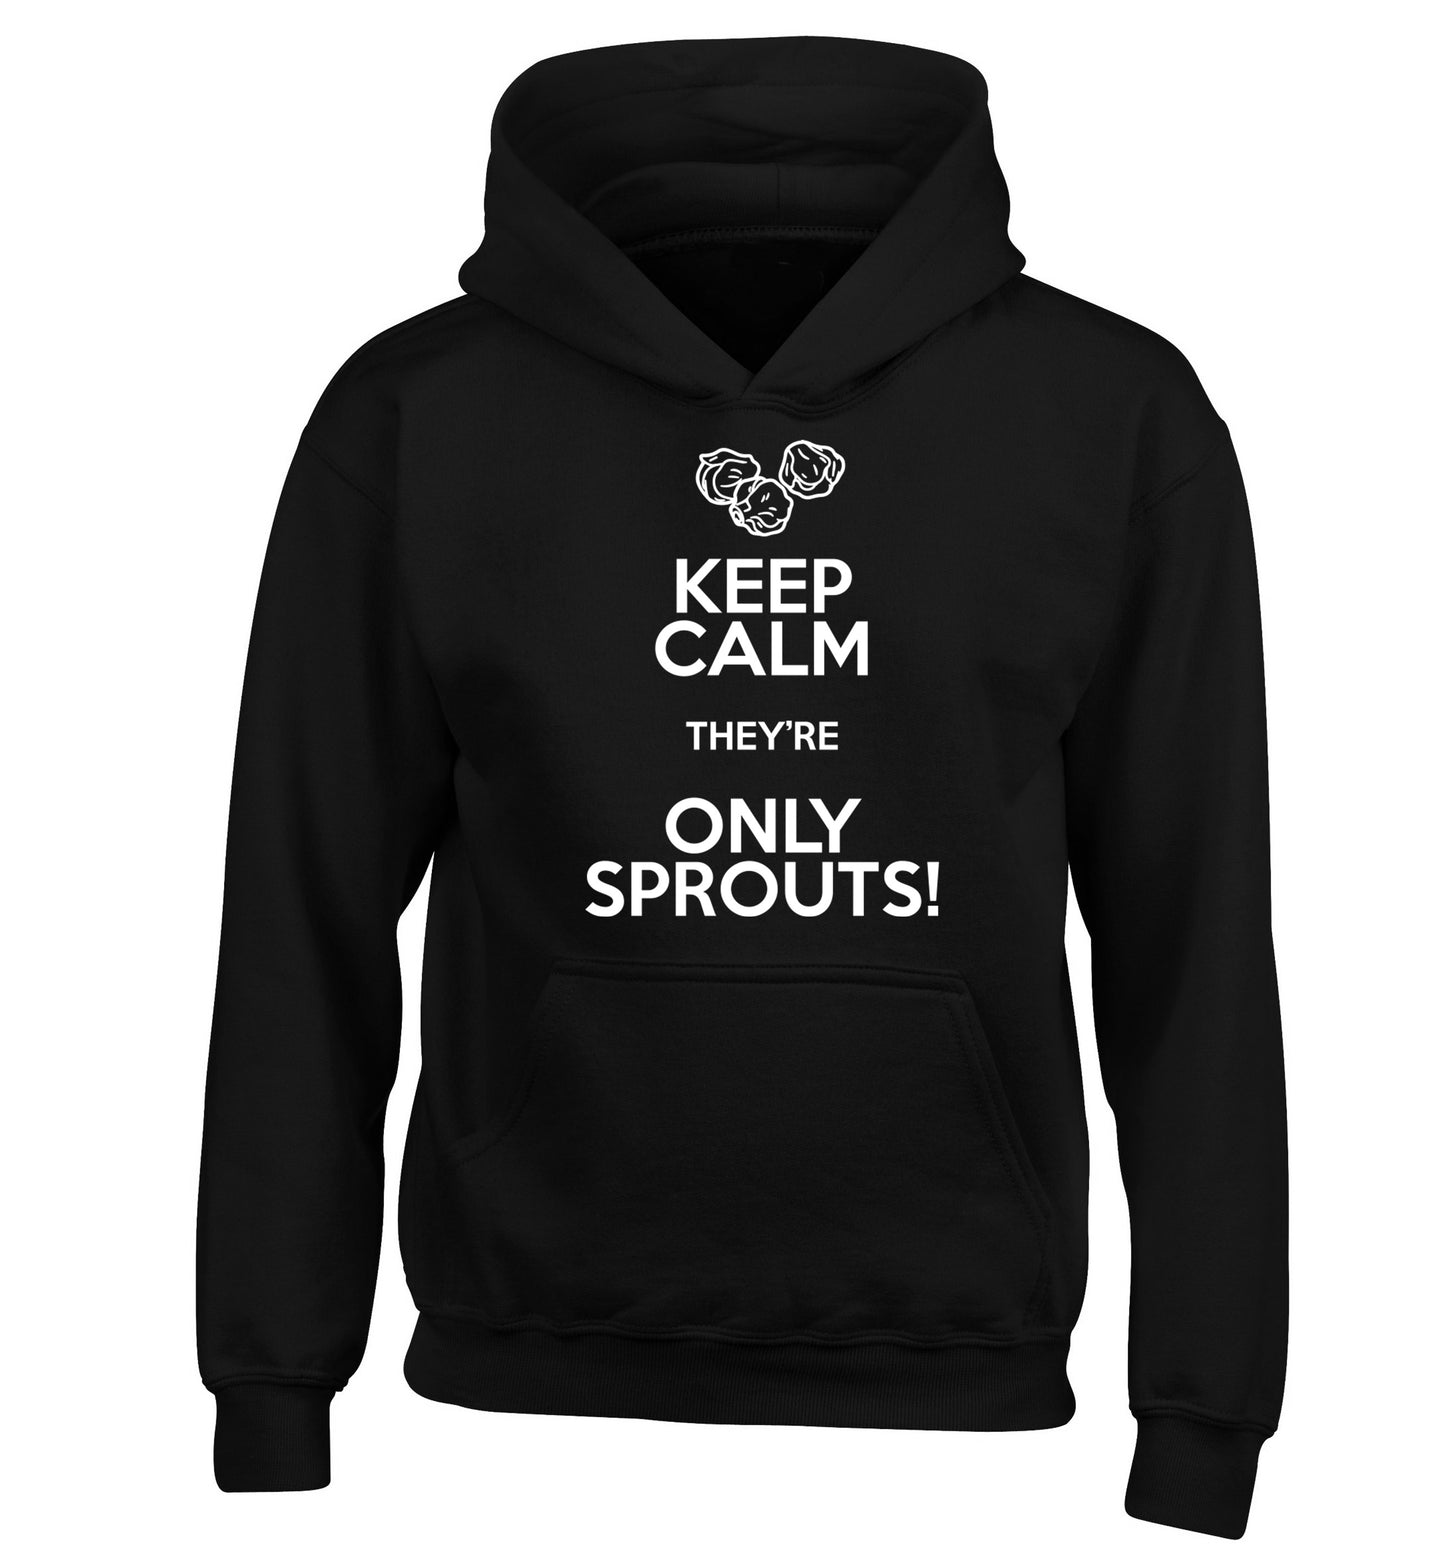 Keep calm they're only sprouts children's black hoodie 12-13 Years